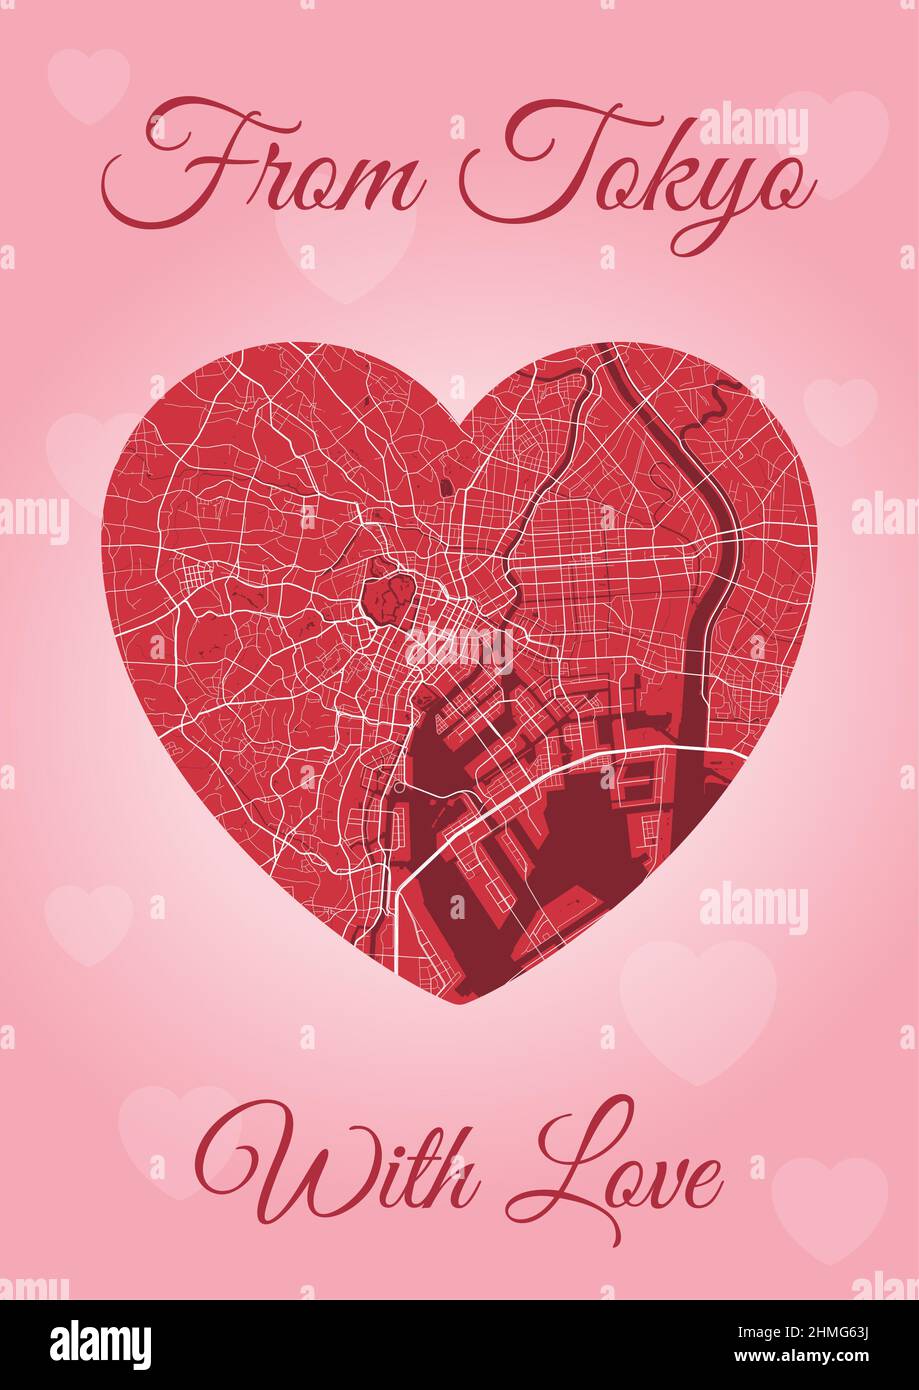 From Tokyo with love card, city map in heart shape. Vertical A4 Pink and red color vector illustration. Love city travel cityscape. Stock Vector